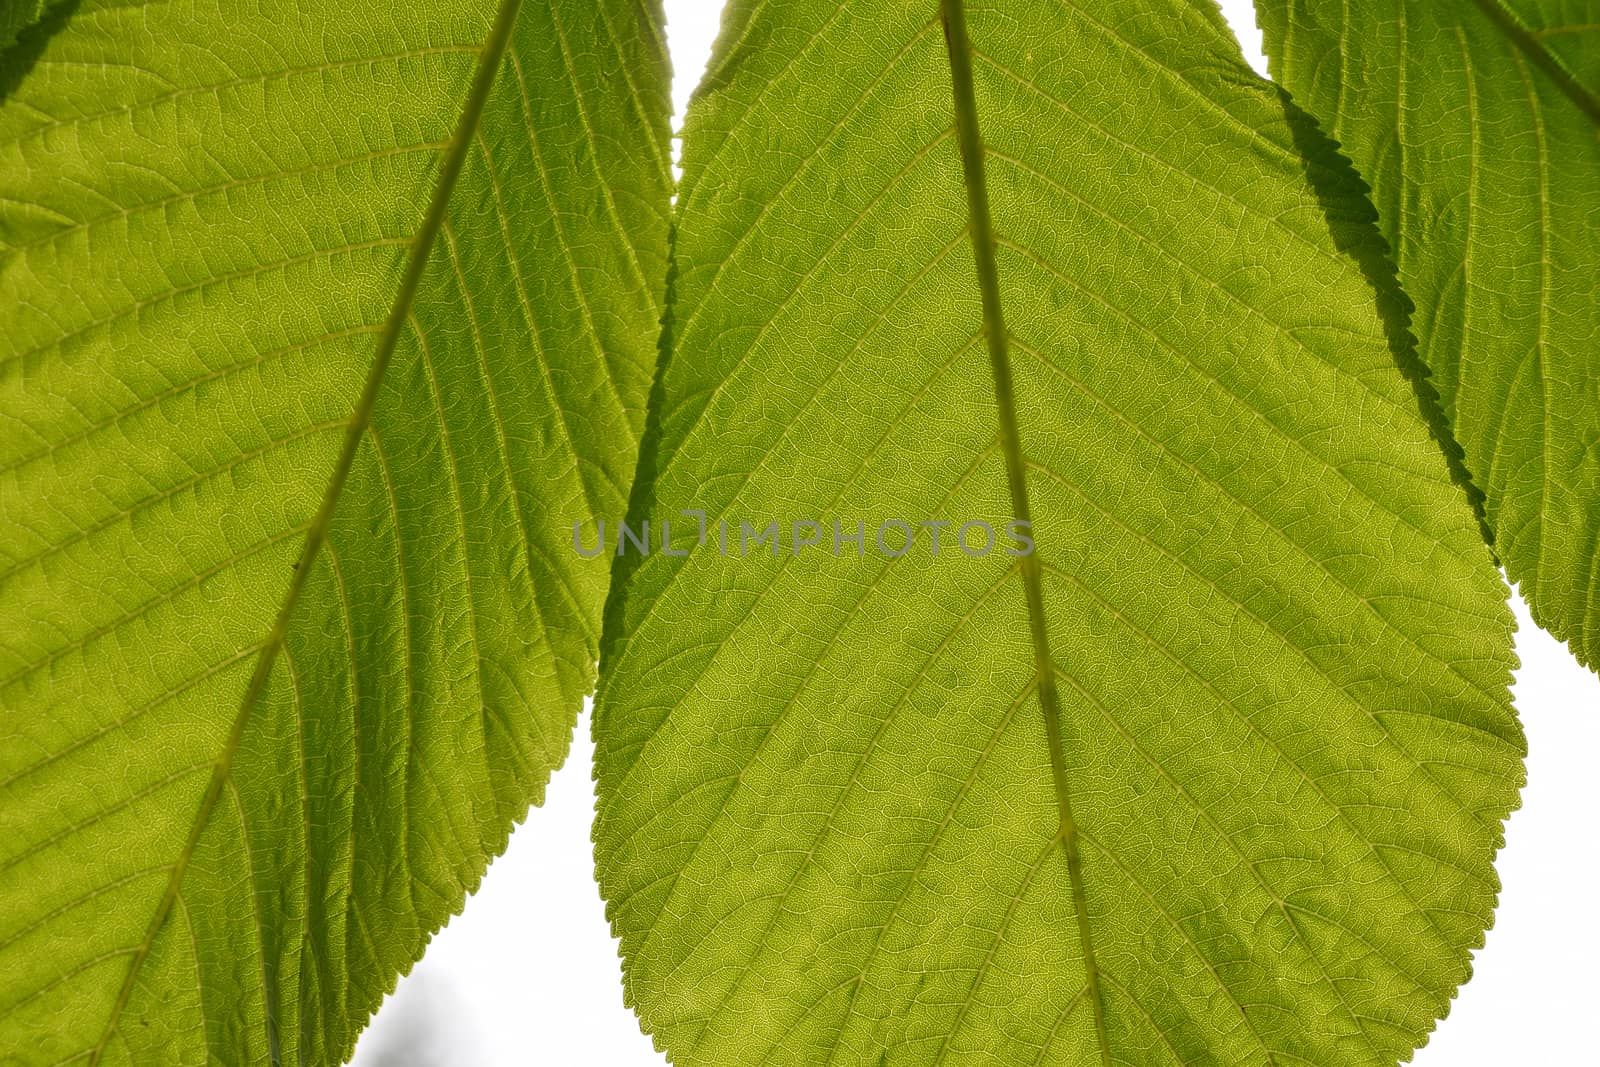 Translucent horse chestnut textured green leaves close up in bac by BreakingTheWalls